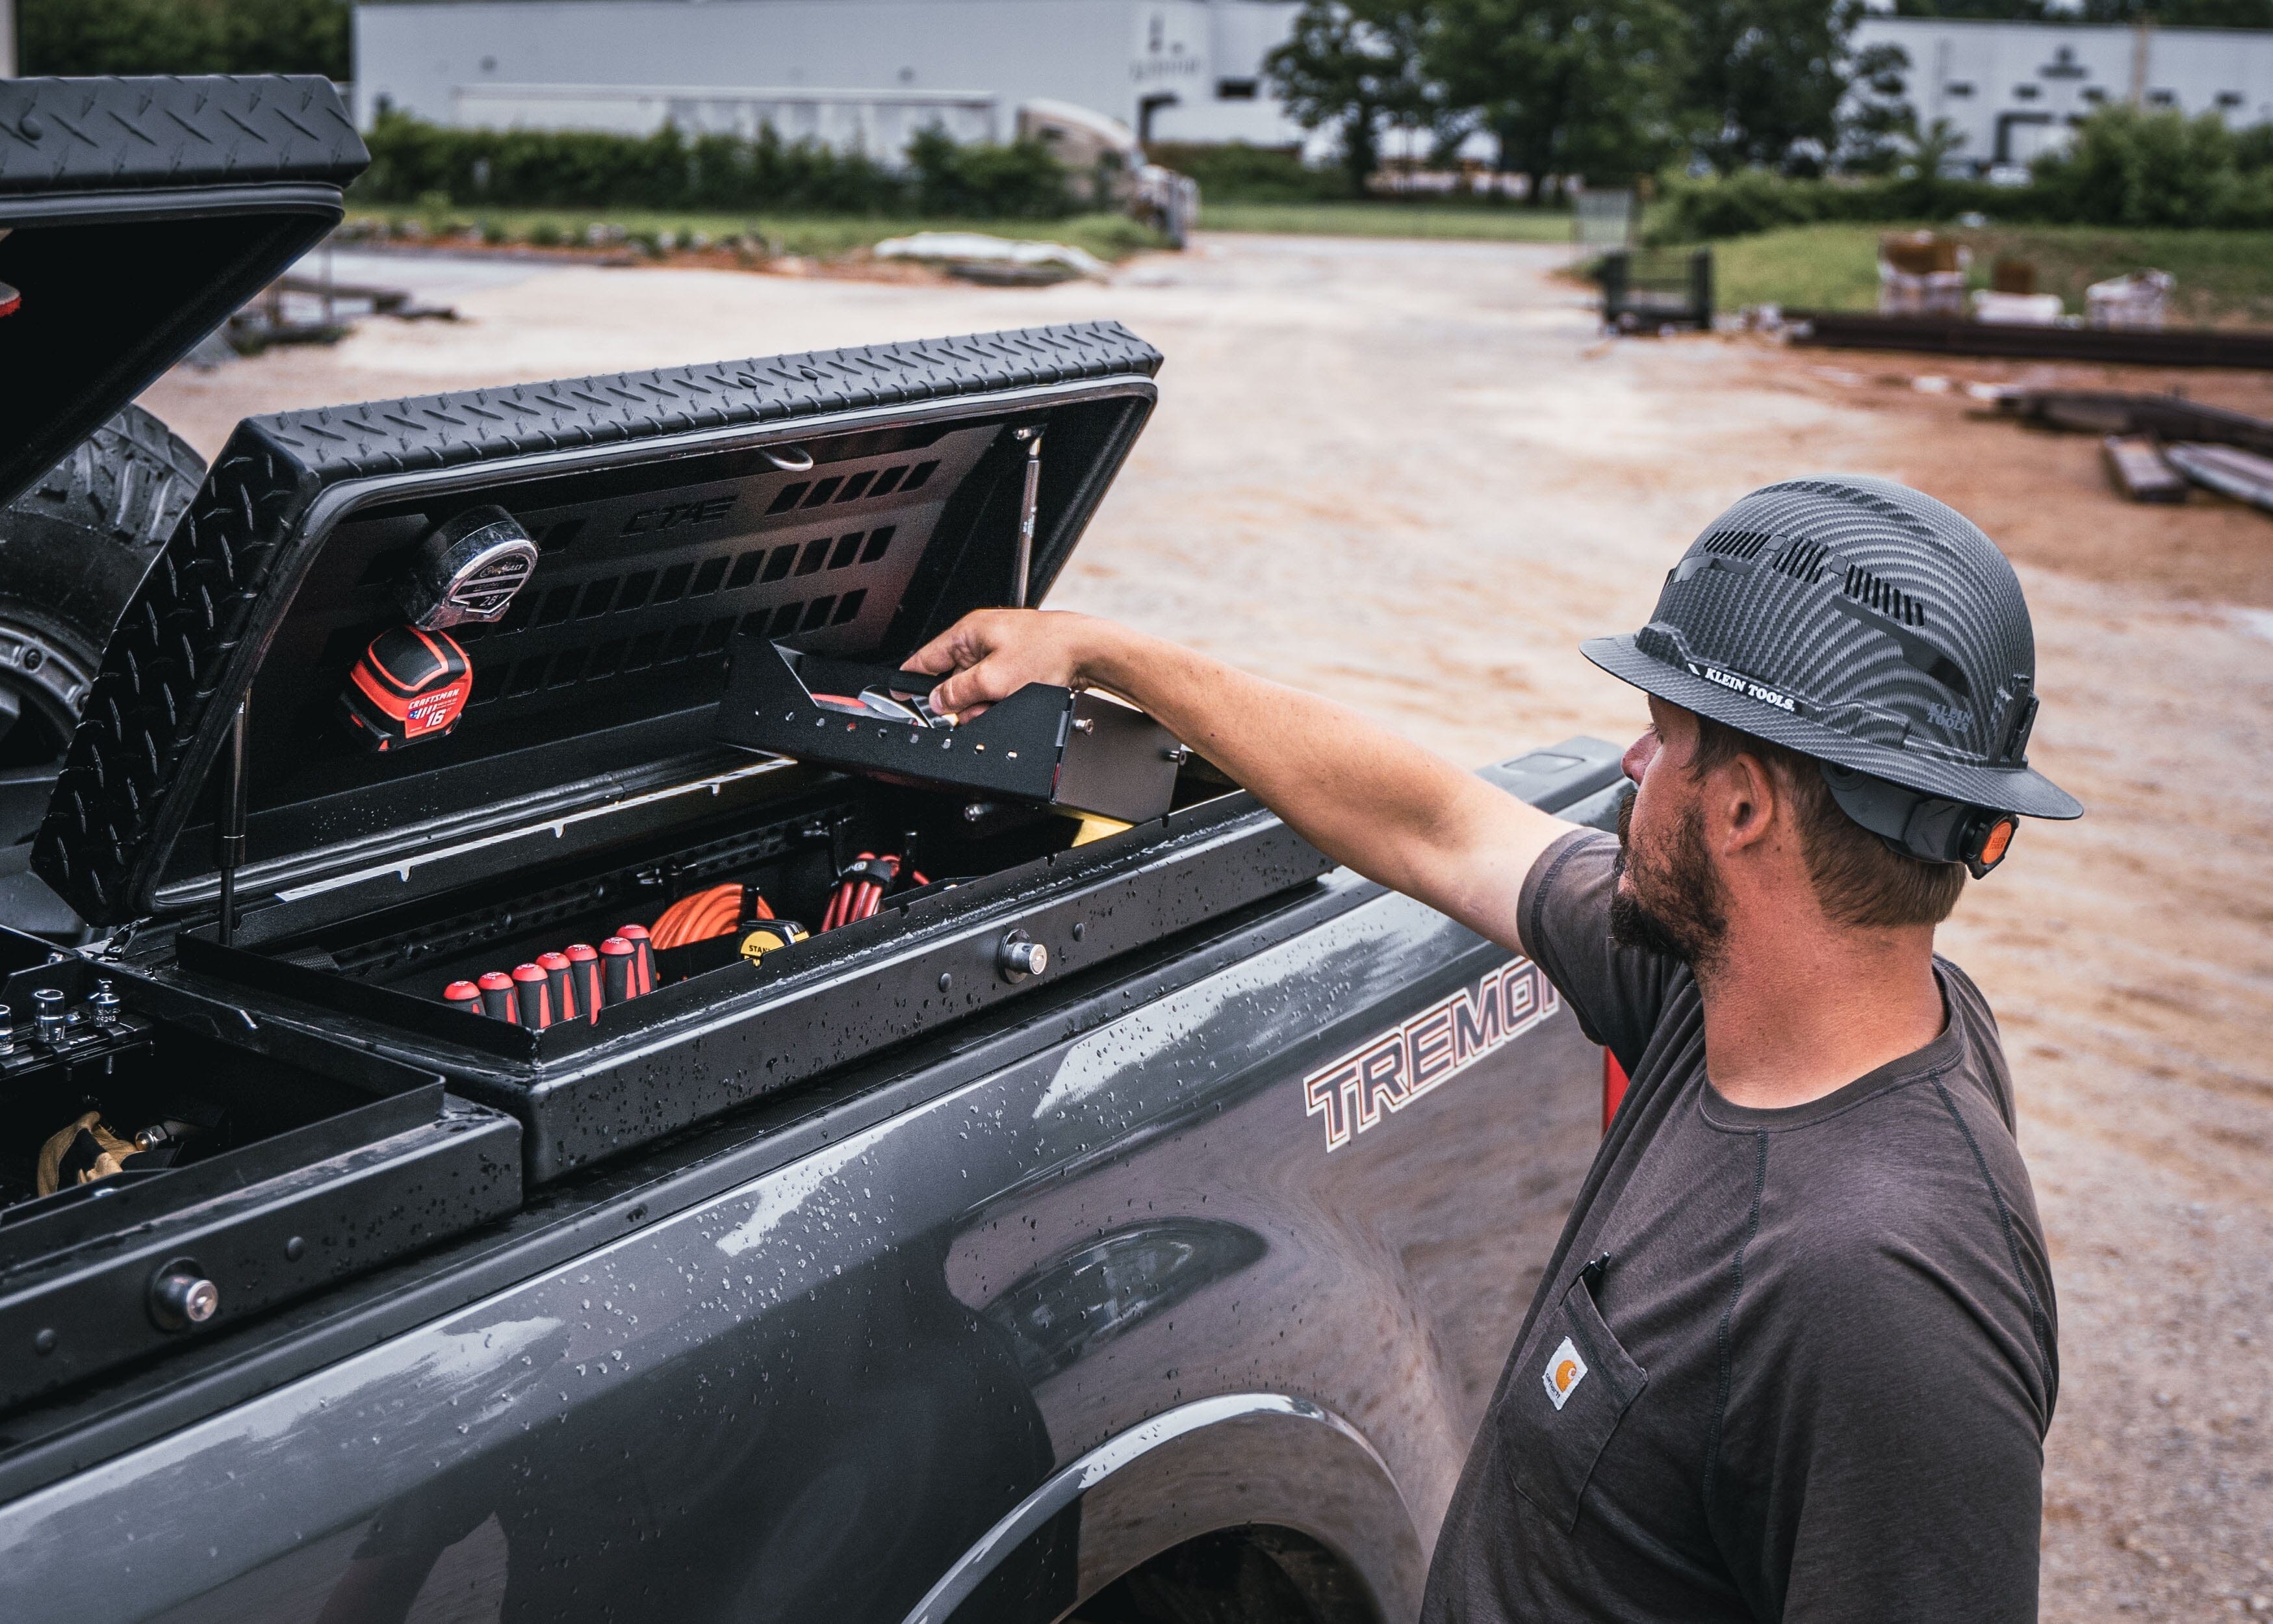 Importance of Proper Organization in a Truck Bed Tool Box  